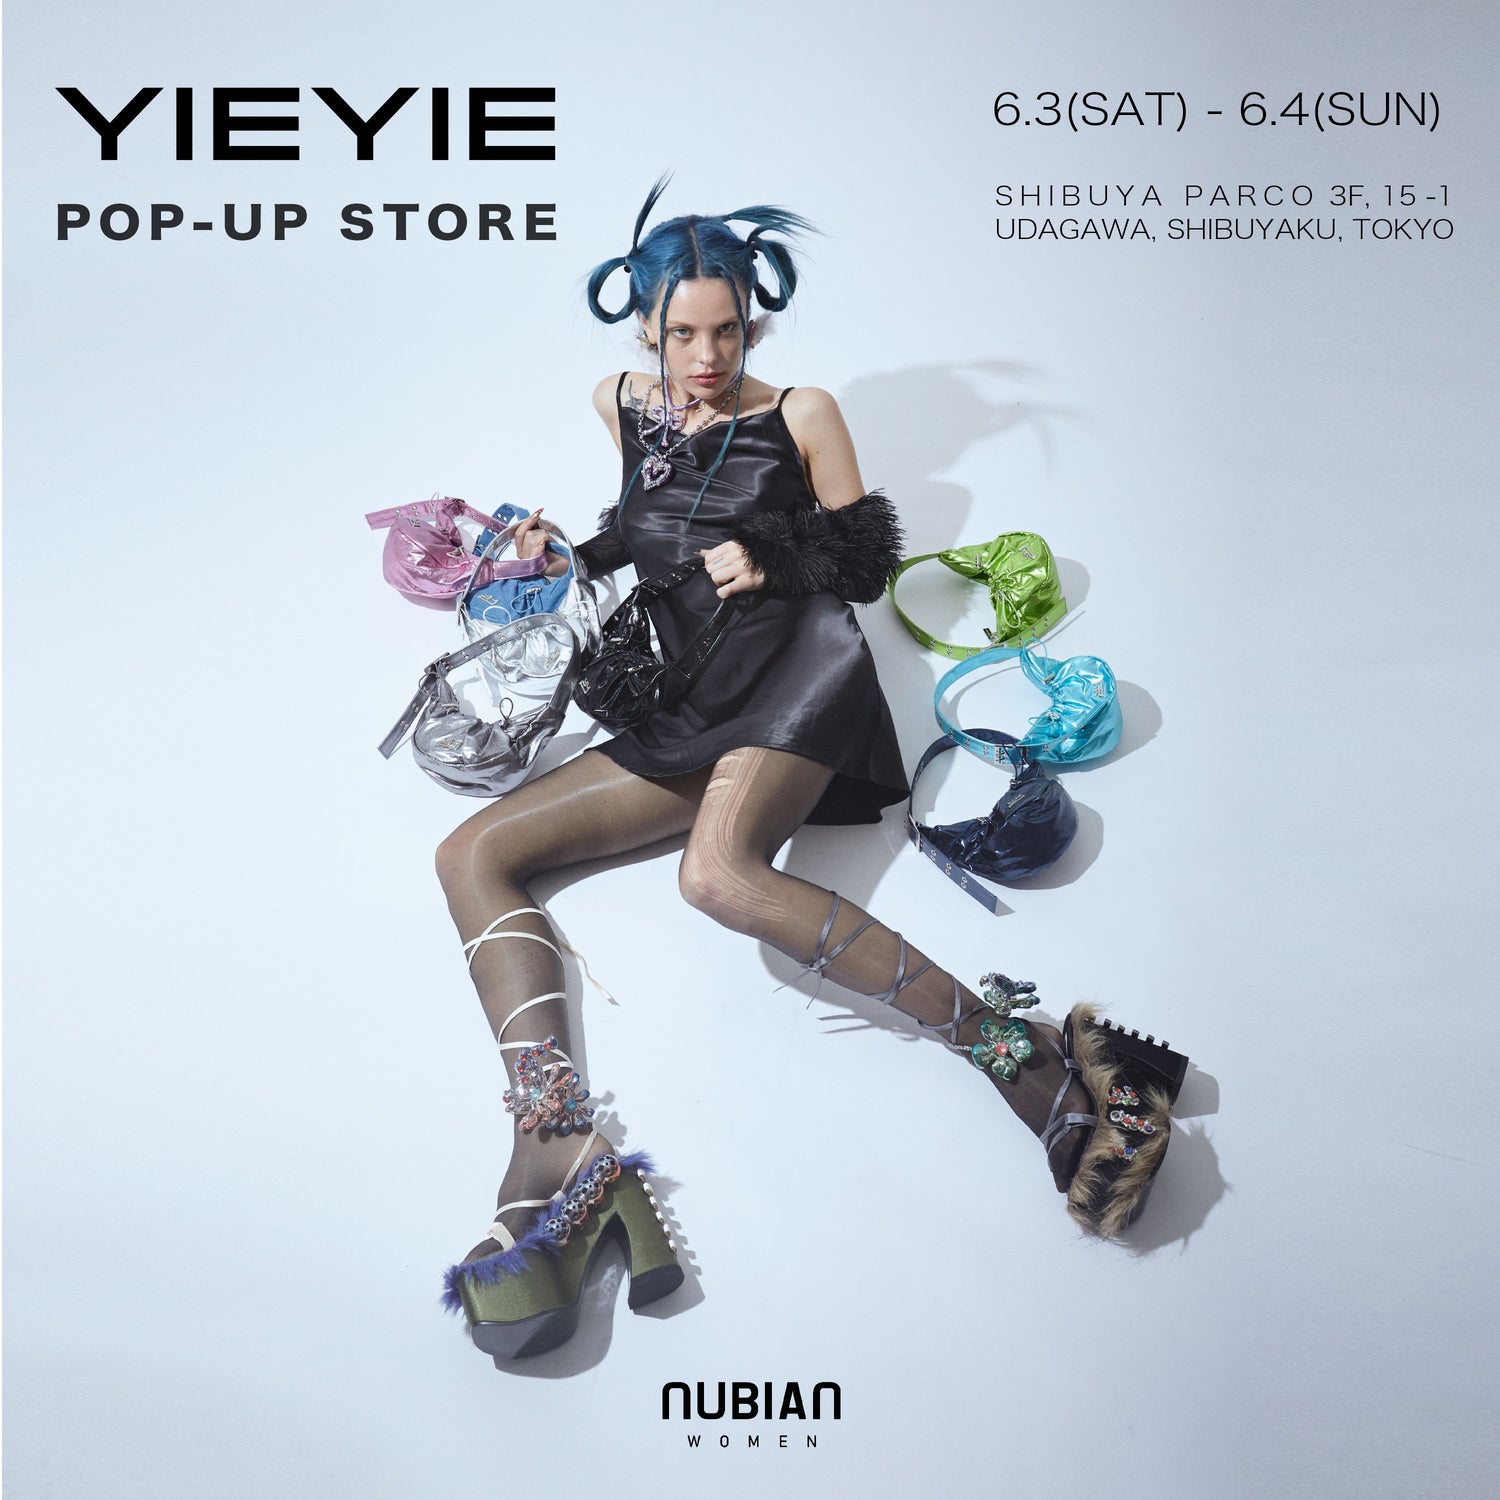 YIE YIE<br>POP-UP STORE